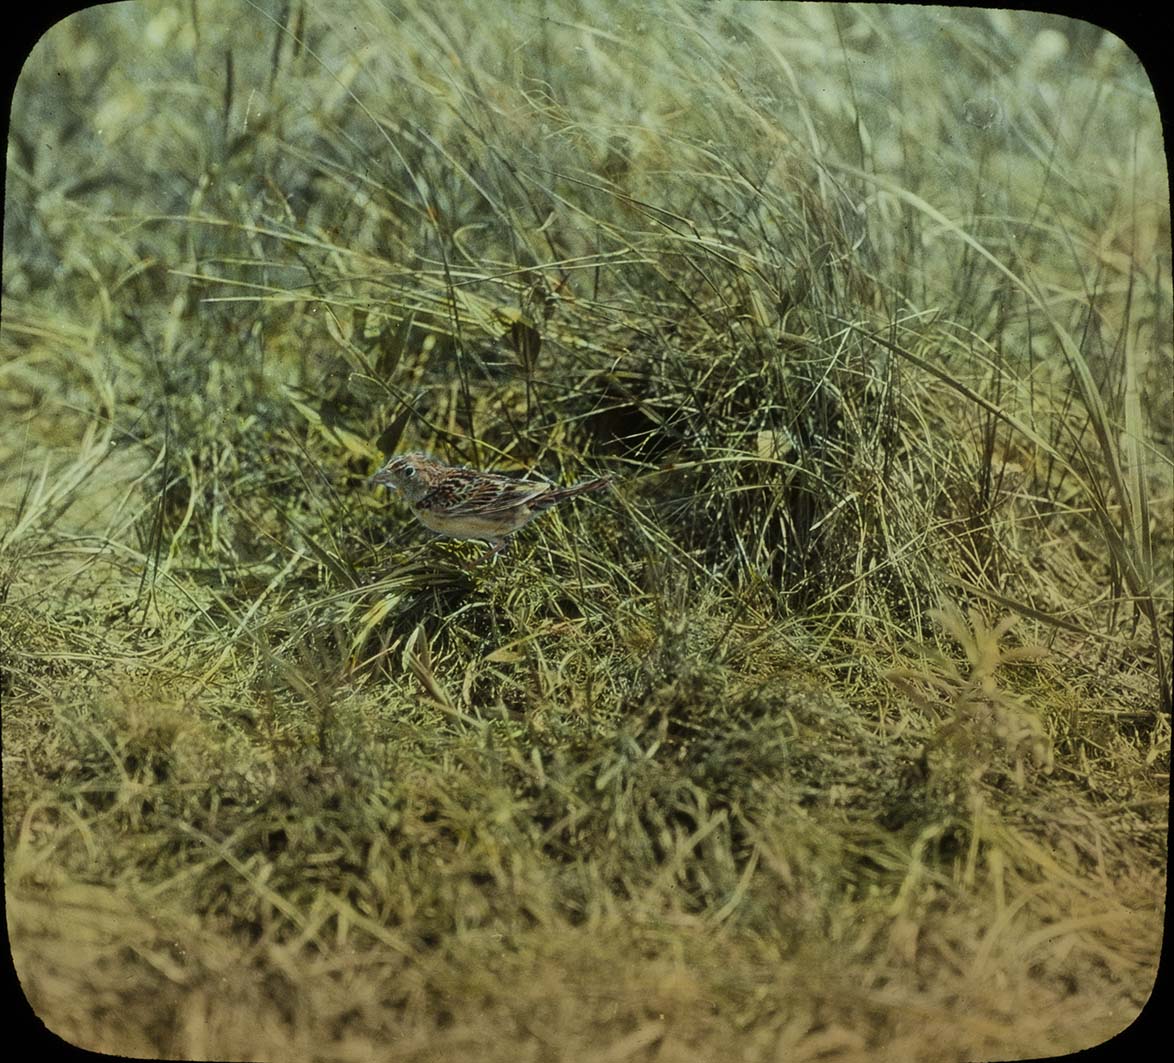 Lantern slide of a Swamp Sparrow standing on the ground